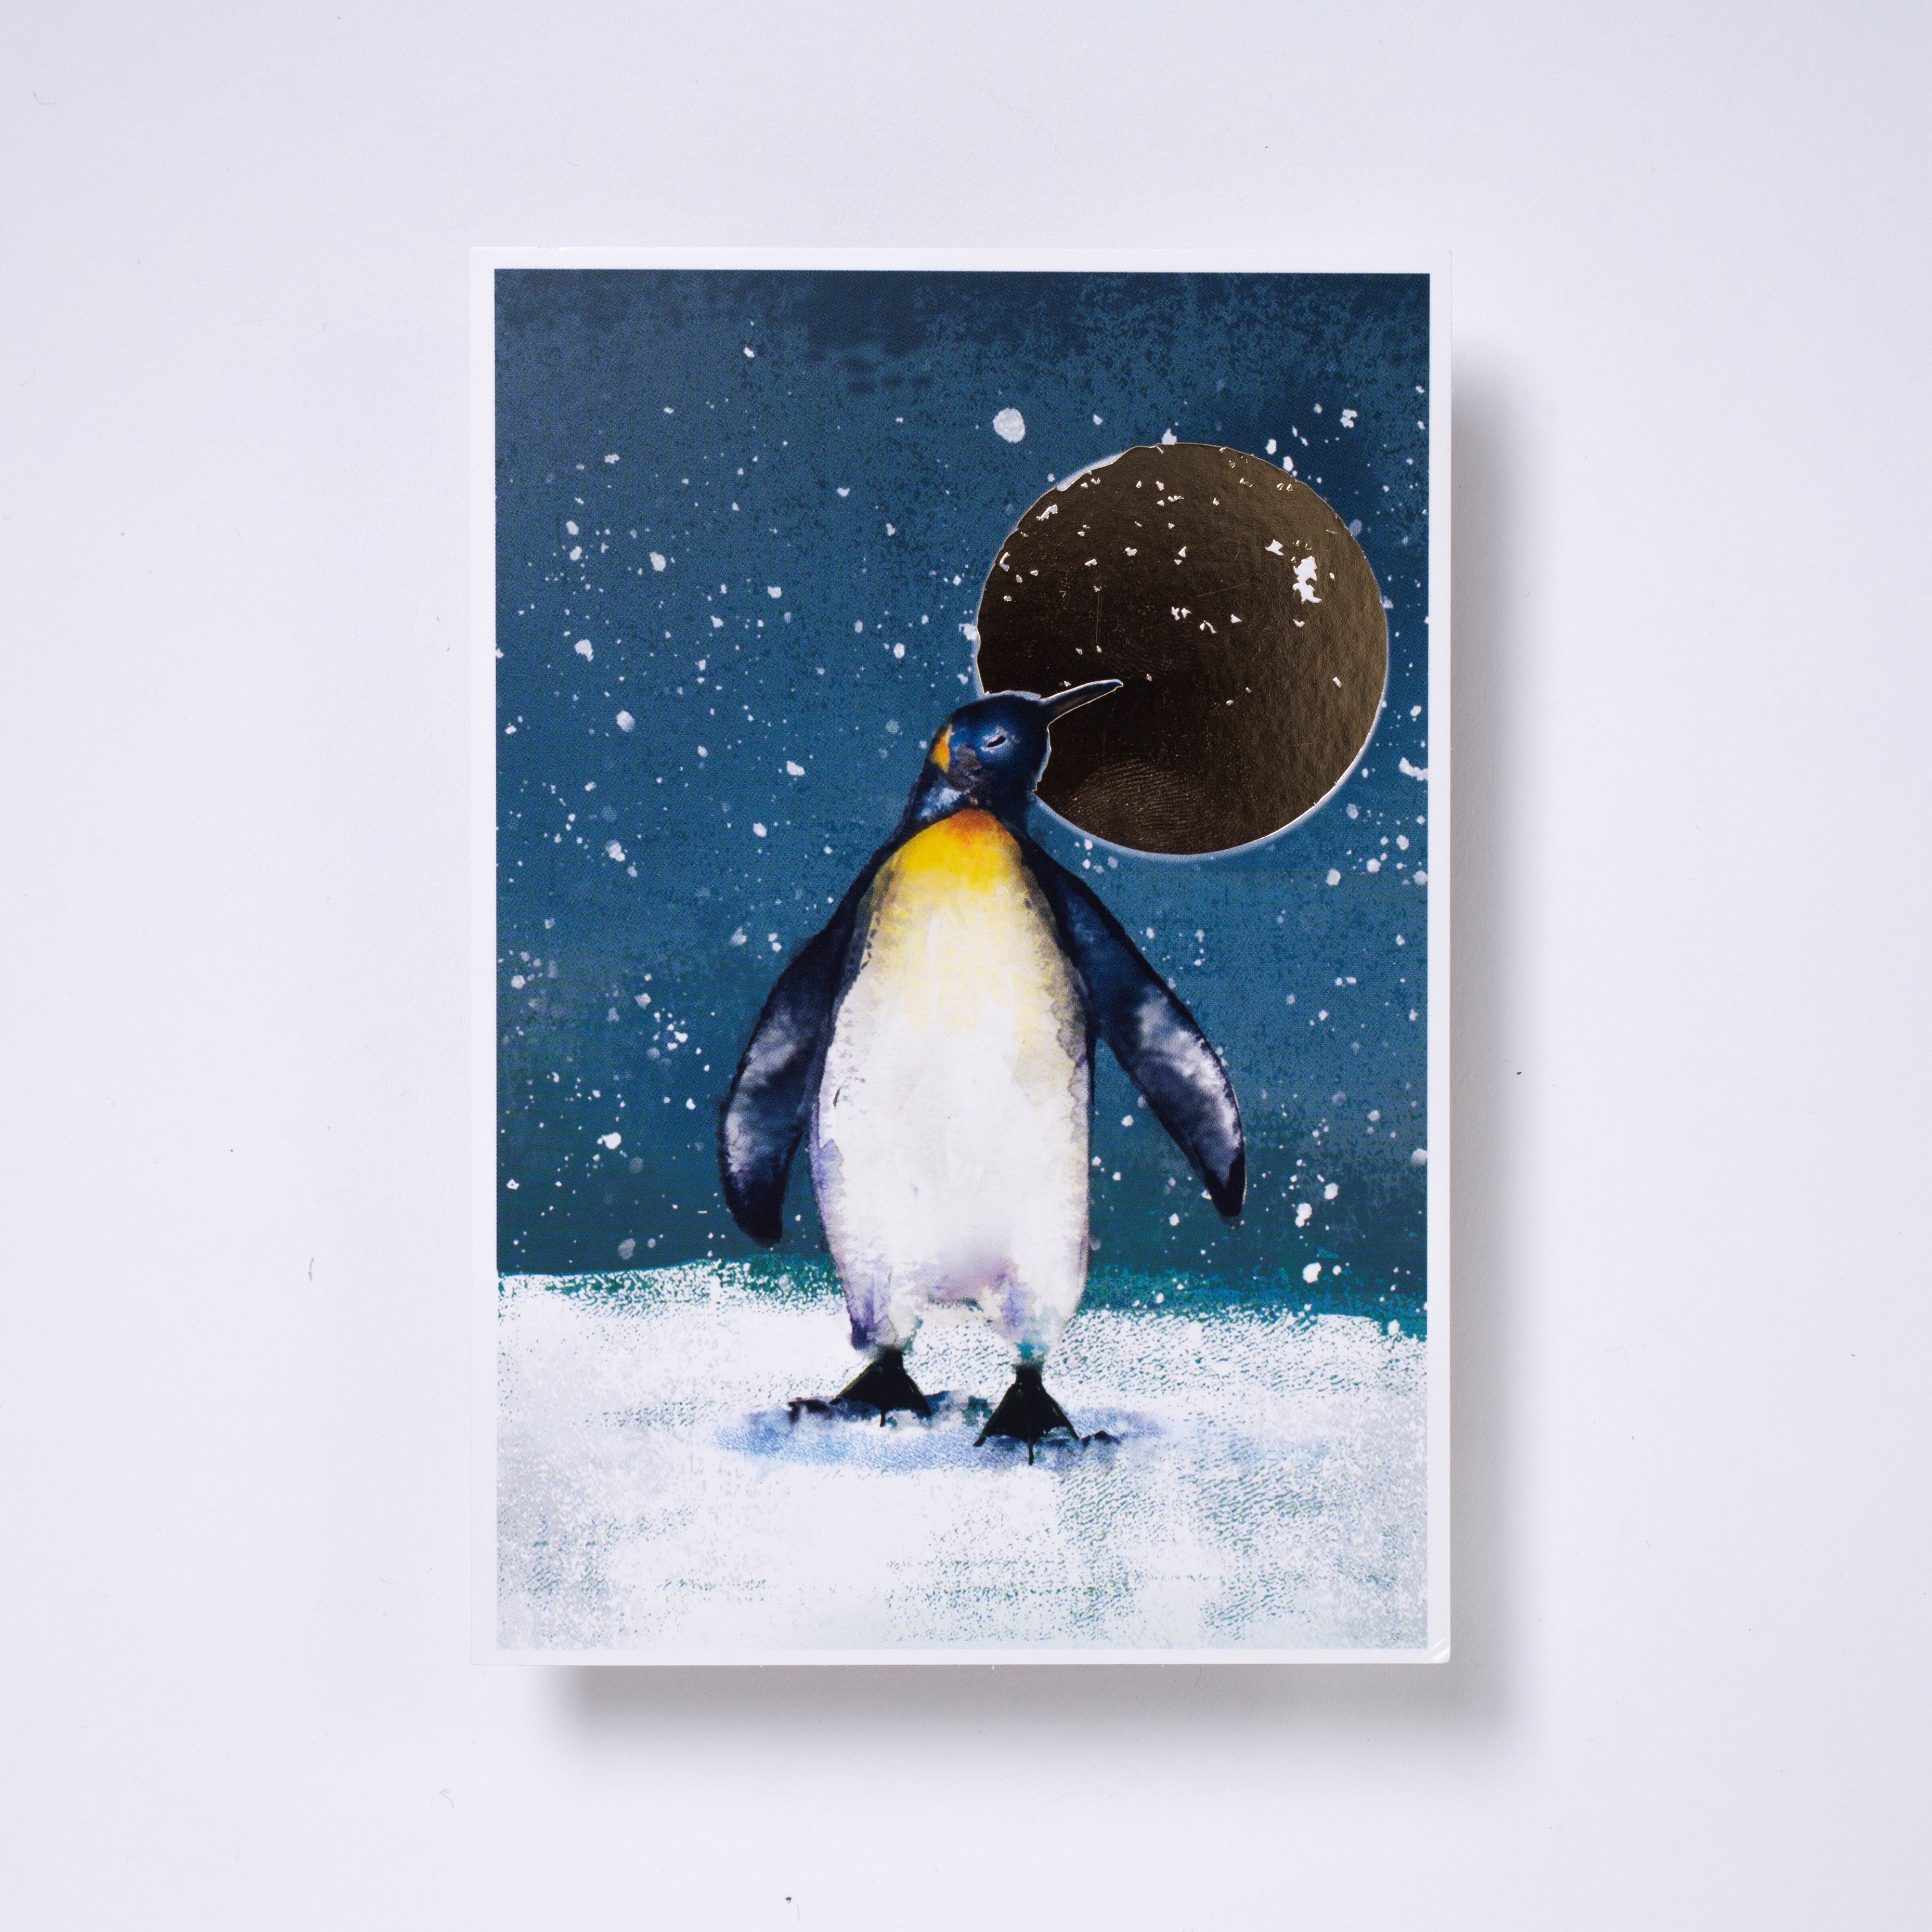 Moonlit penguin - Welsh/English bilingual pack of 10 charity Christmas cards with envelopes